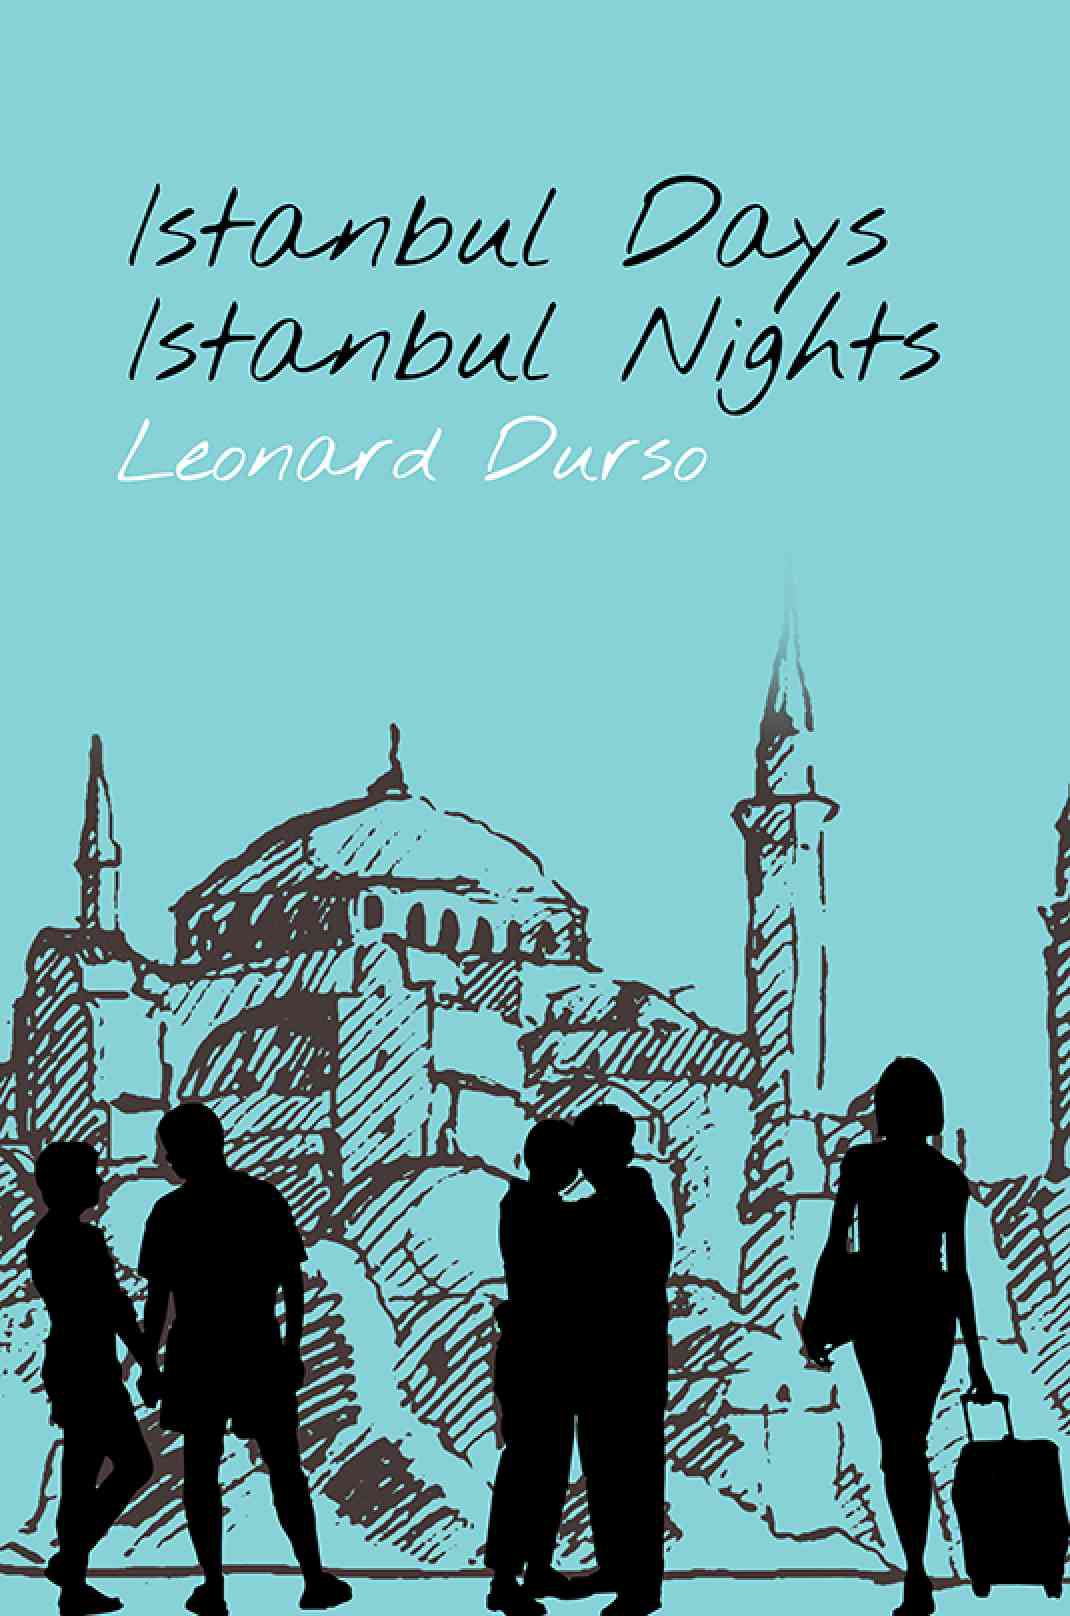 Author of Istanbul Days Istanbul Nights, Leonard Durso featured in the LI Herald  